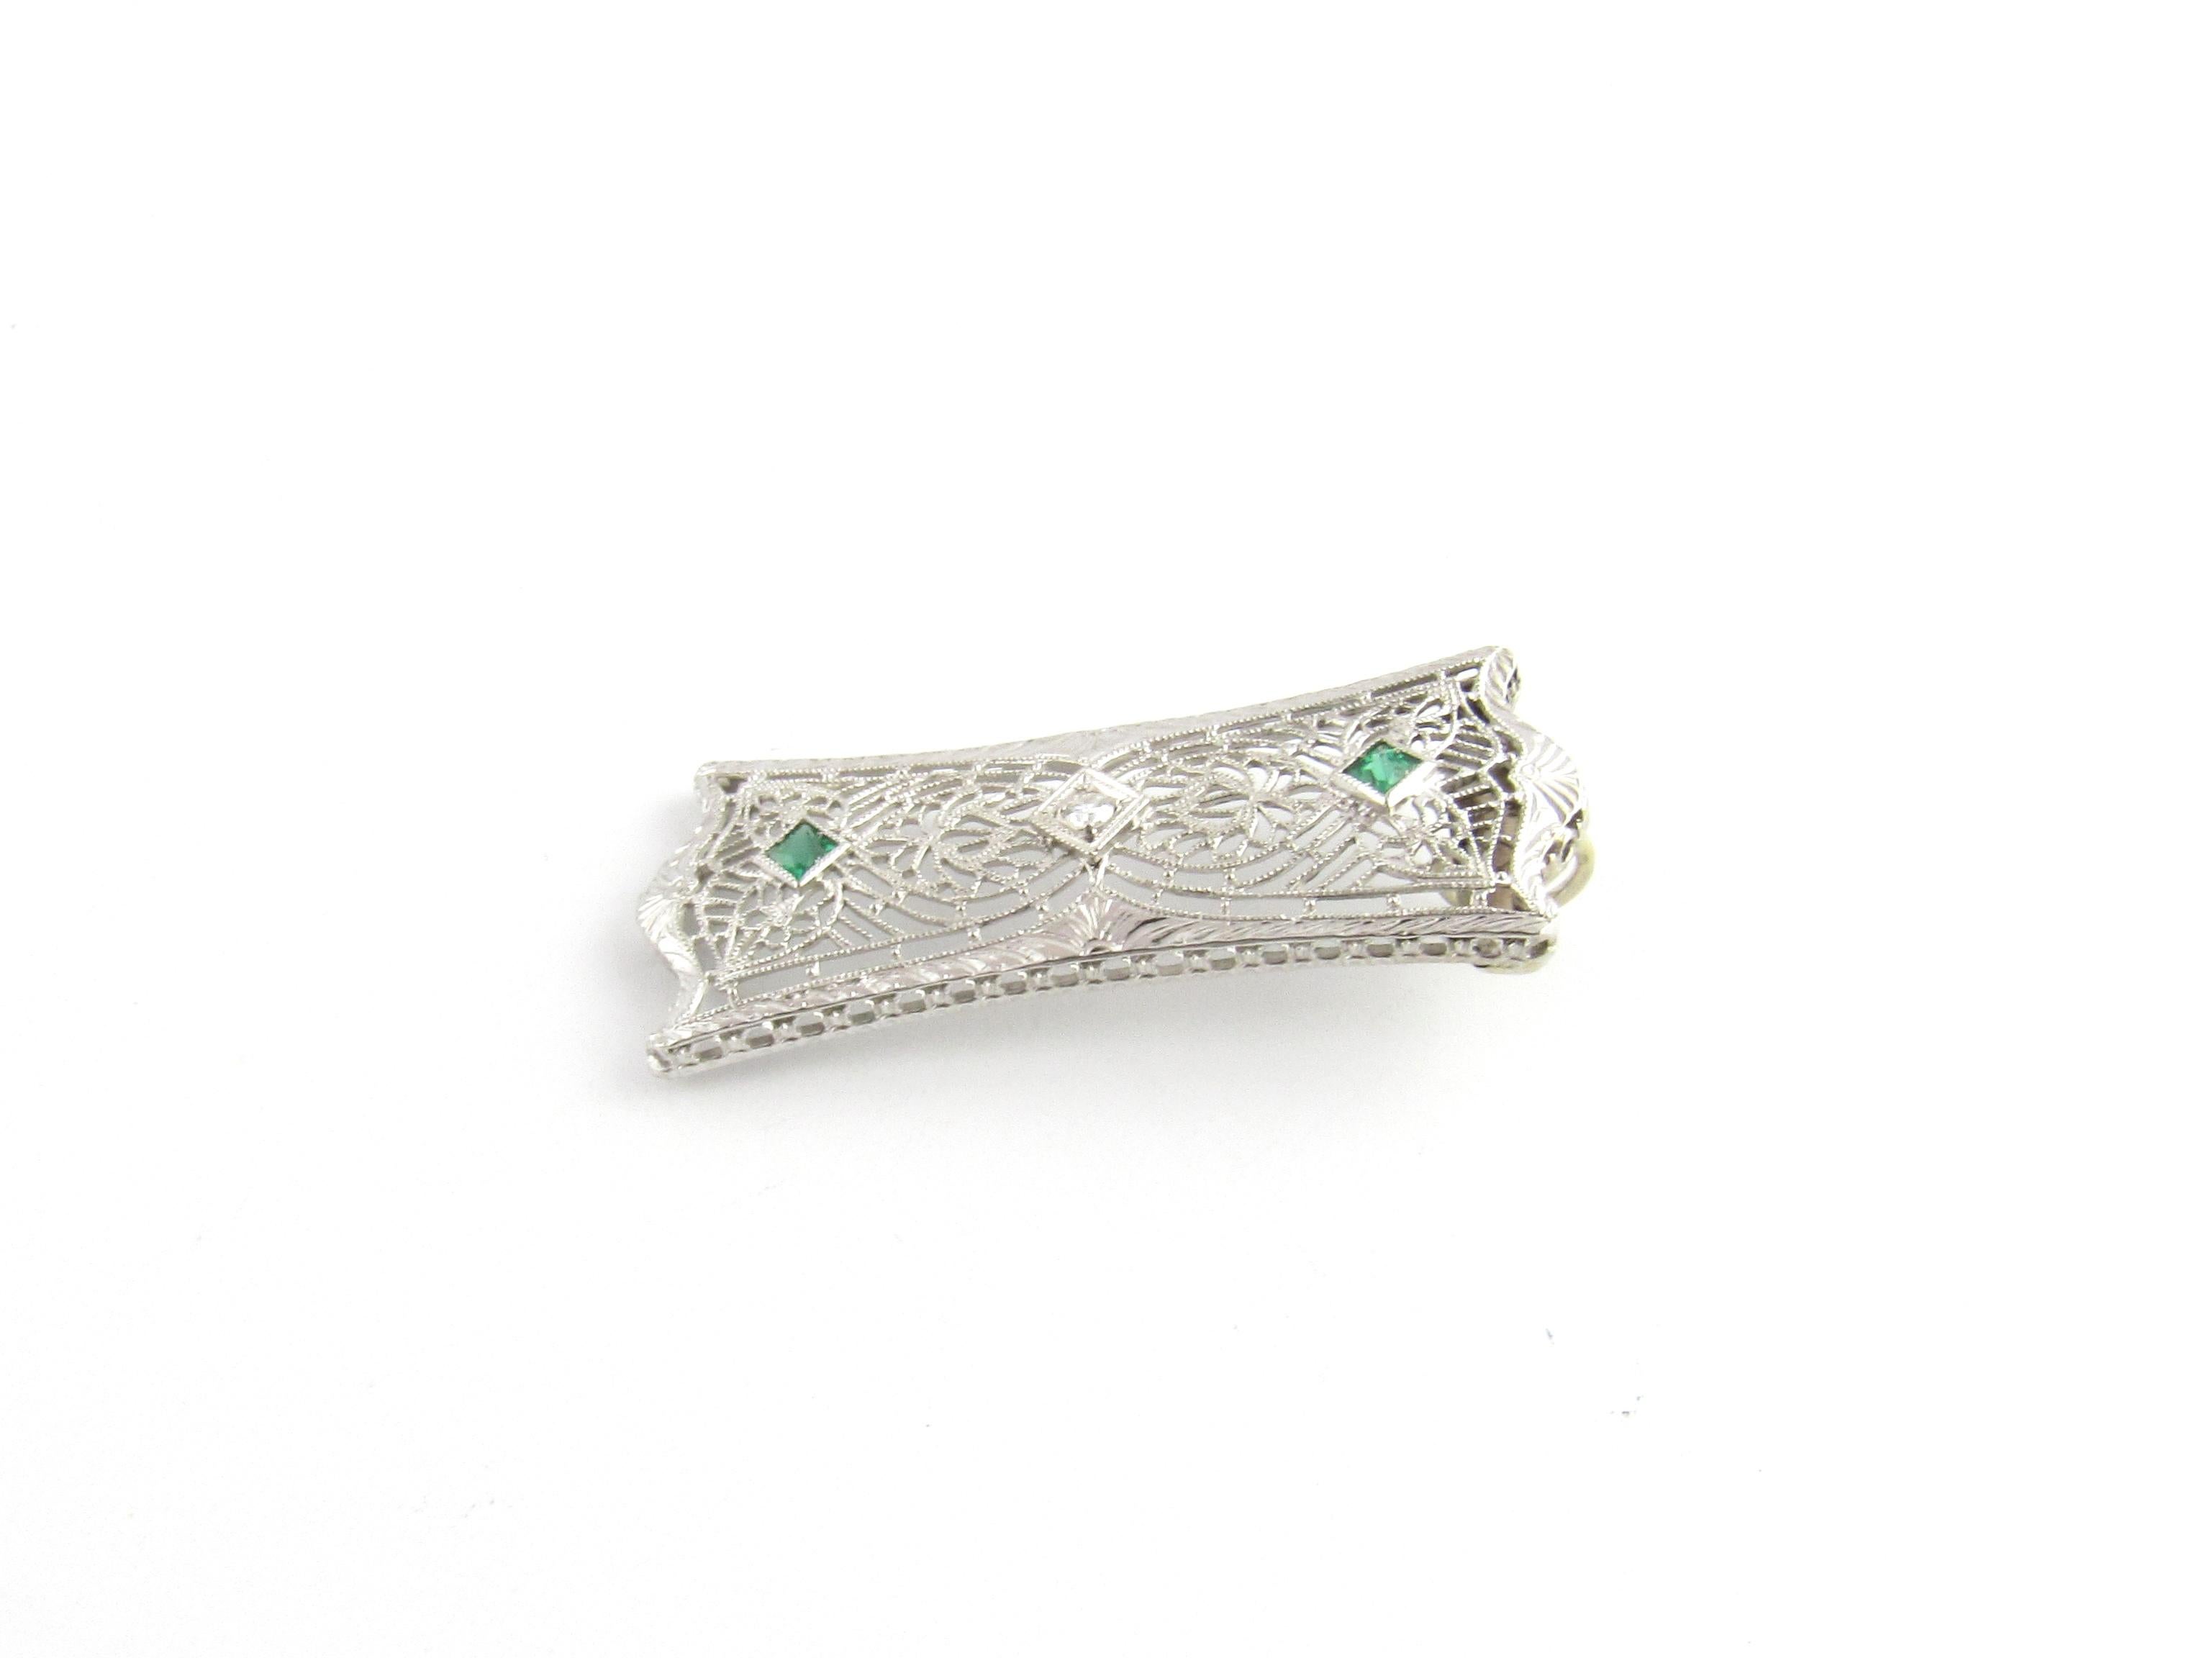 14 Karat White Gold Diamond and Emerald Pendant-

This lovely pendant features one single cut diamond and two genuine emeralds set in beautifully detailed white gold filigree.

Approximate total diamond weight: .03 ct.

Diamond clarity: SI1
Diamond